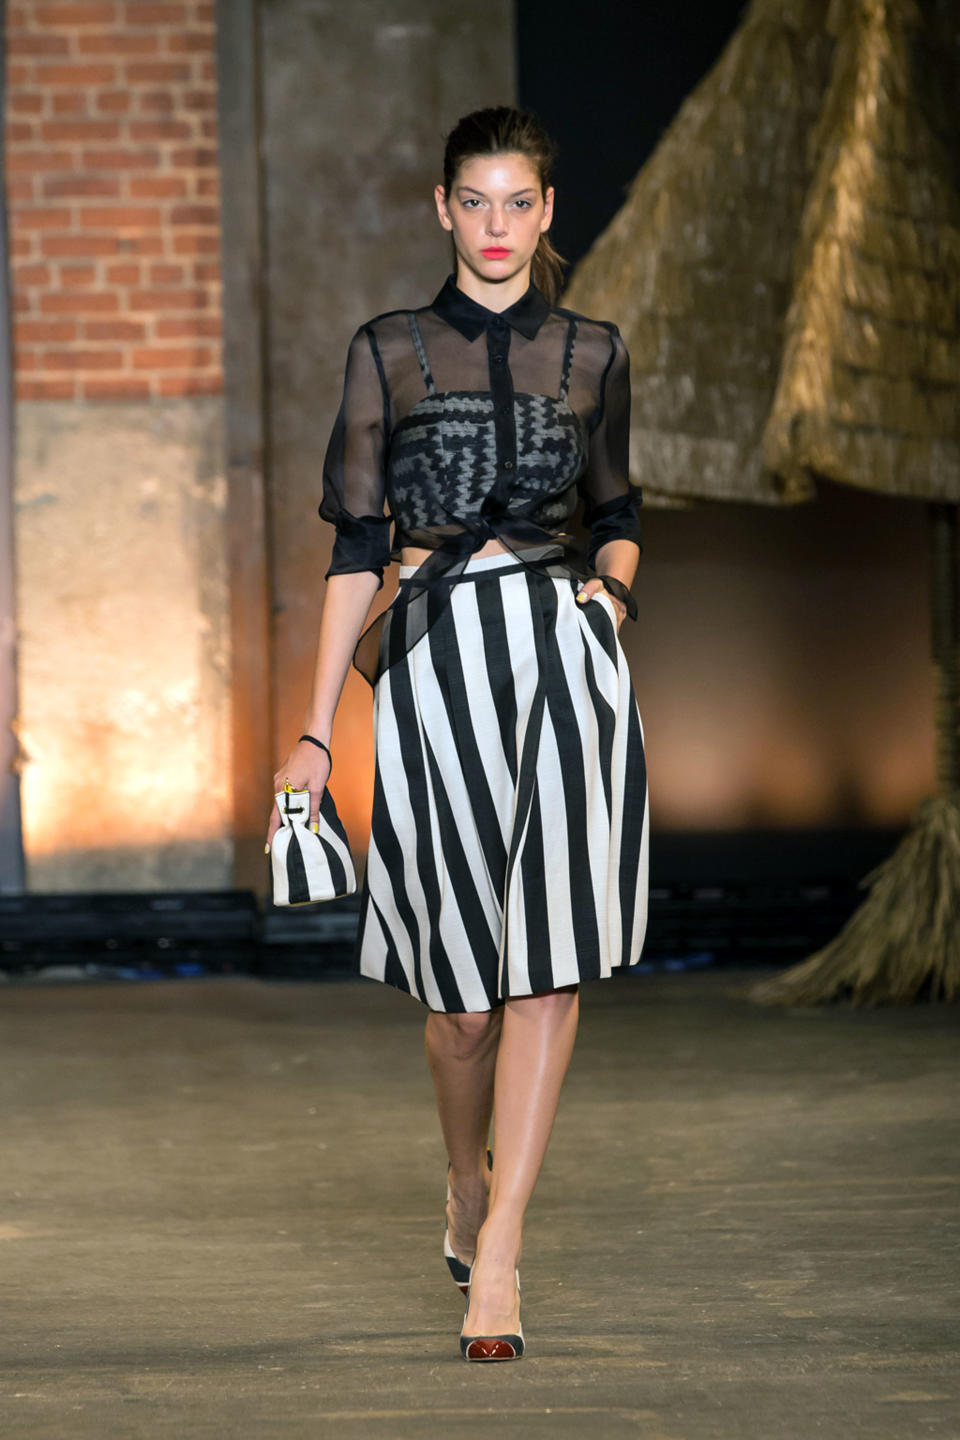 In this Saturday, Sept. 7, 2013, photo, provided by Christian Siriano, fashion from the Christian Siriano Spring 2014 collection is modeled during Fashion Week in New York. (AP Photo/Christian Siriano)